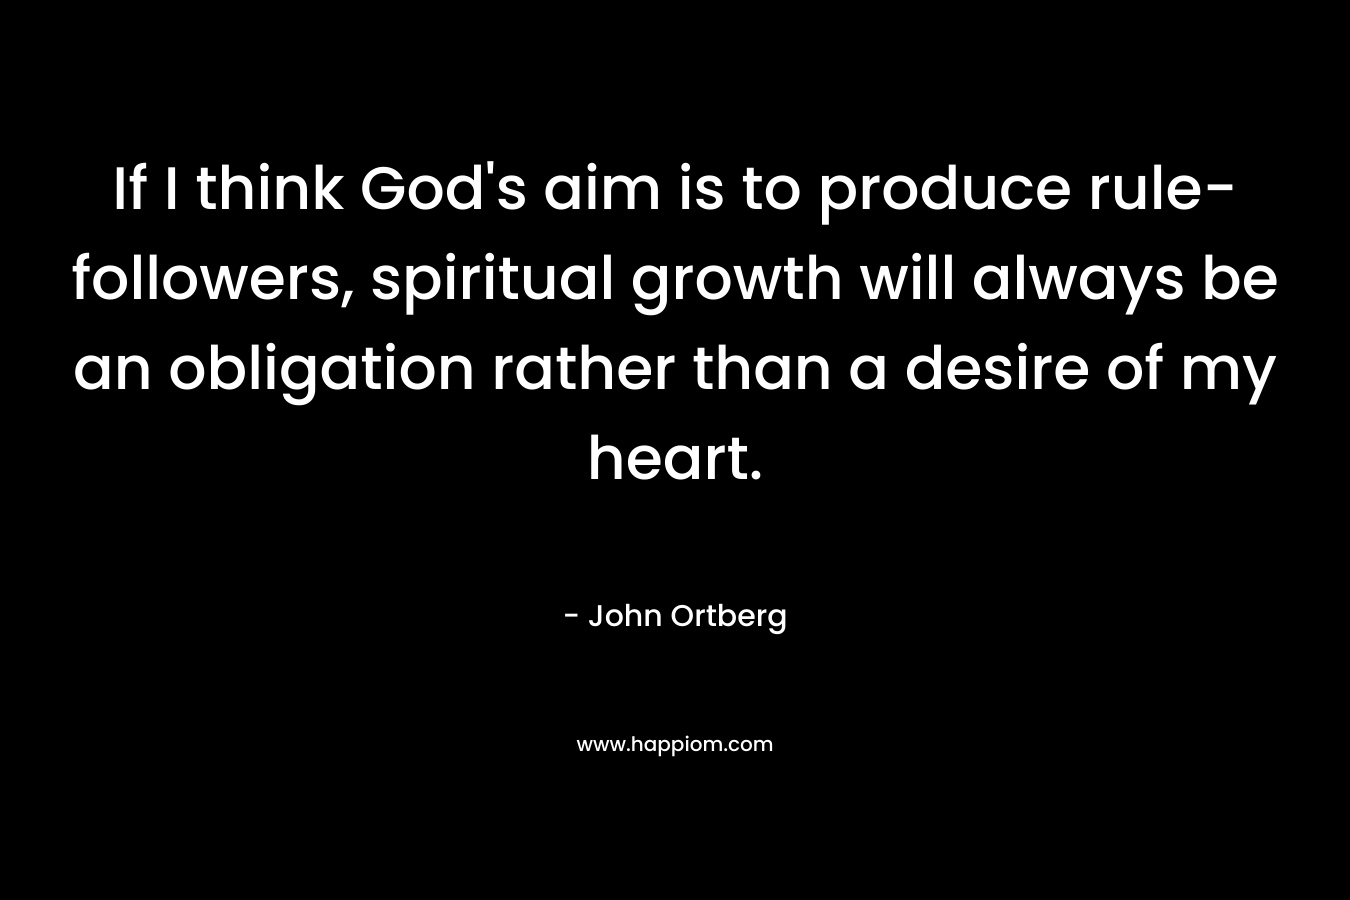 If I think God’s aim is to produce rule-followers, spiritual growth will always be an obligation rather than a desire of my heart. – John Ortberg